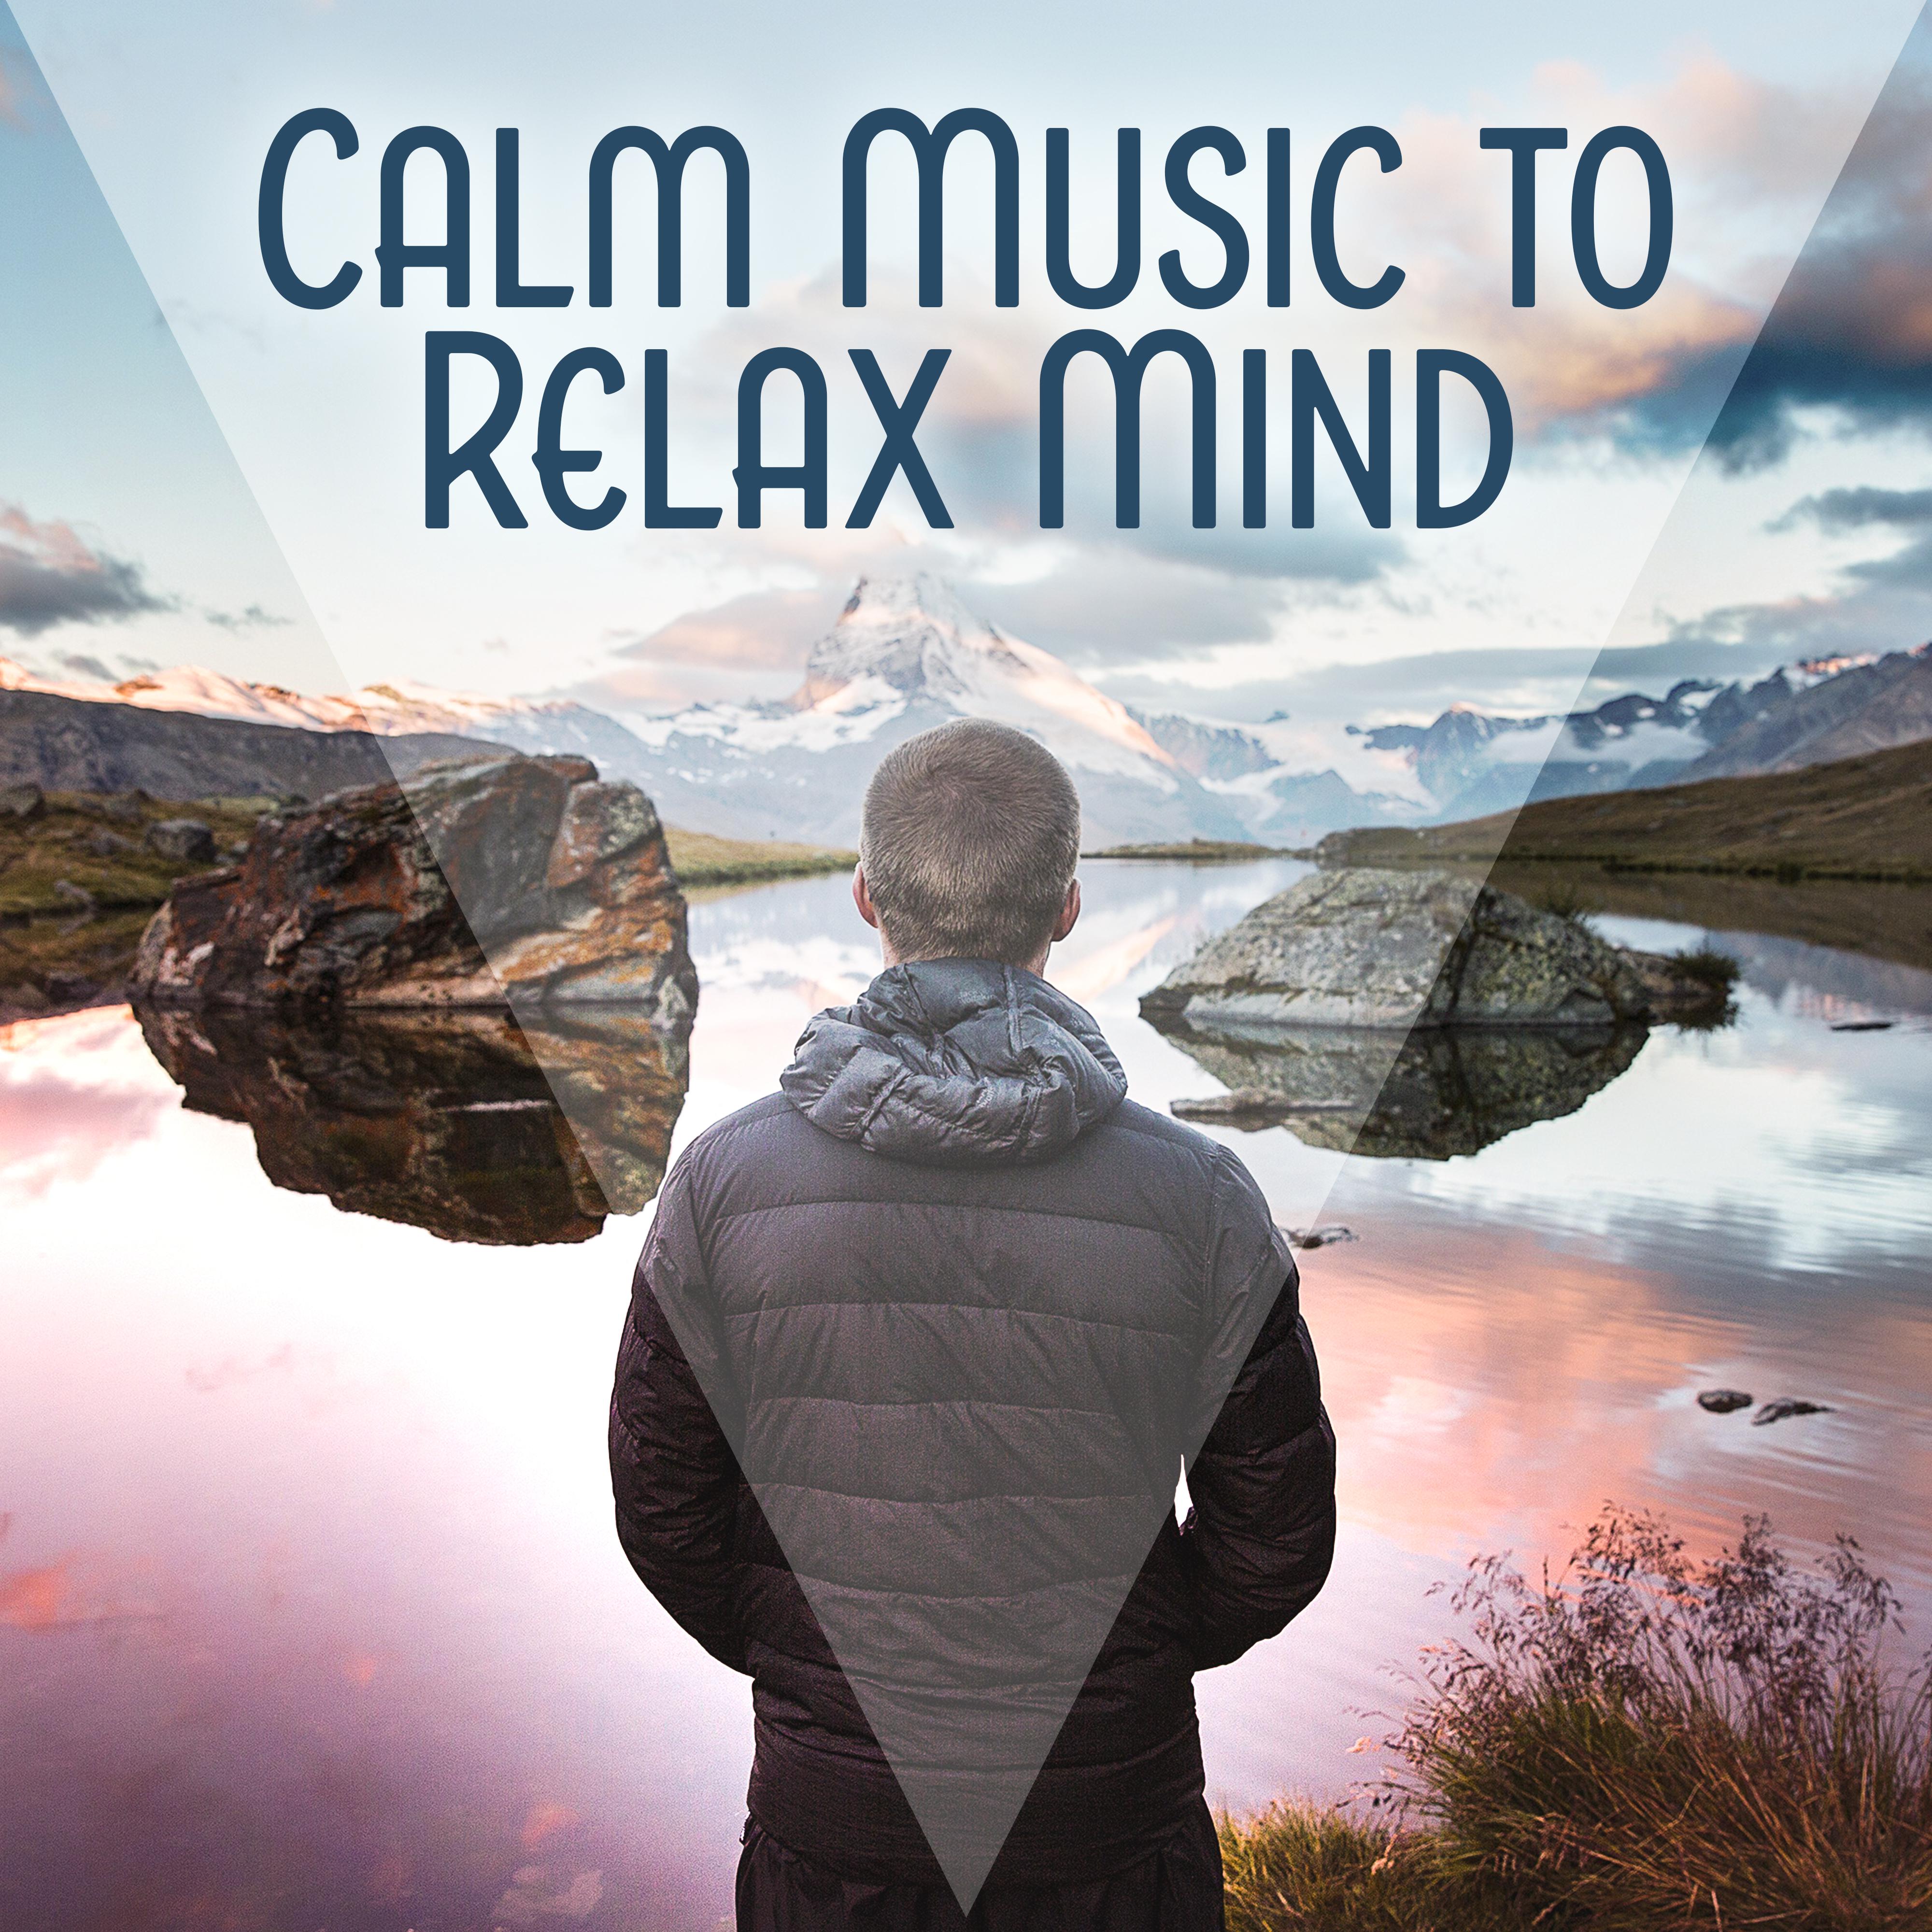 Calm Music to Relax Mind  Soft Sounds, Silent Music, New Age Relaxation, Chakra Balancing